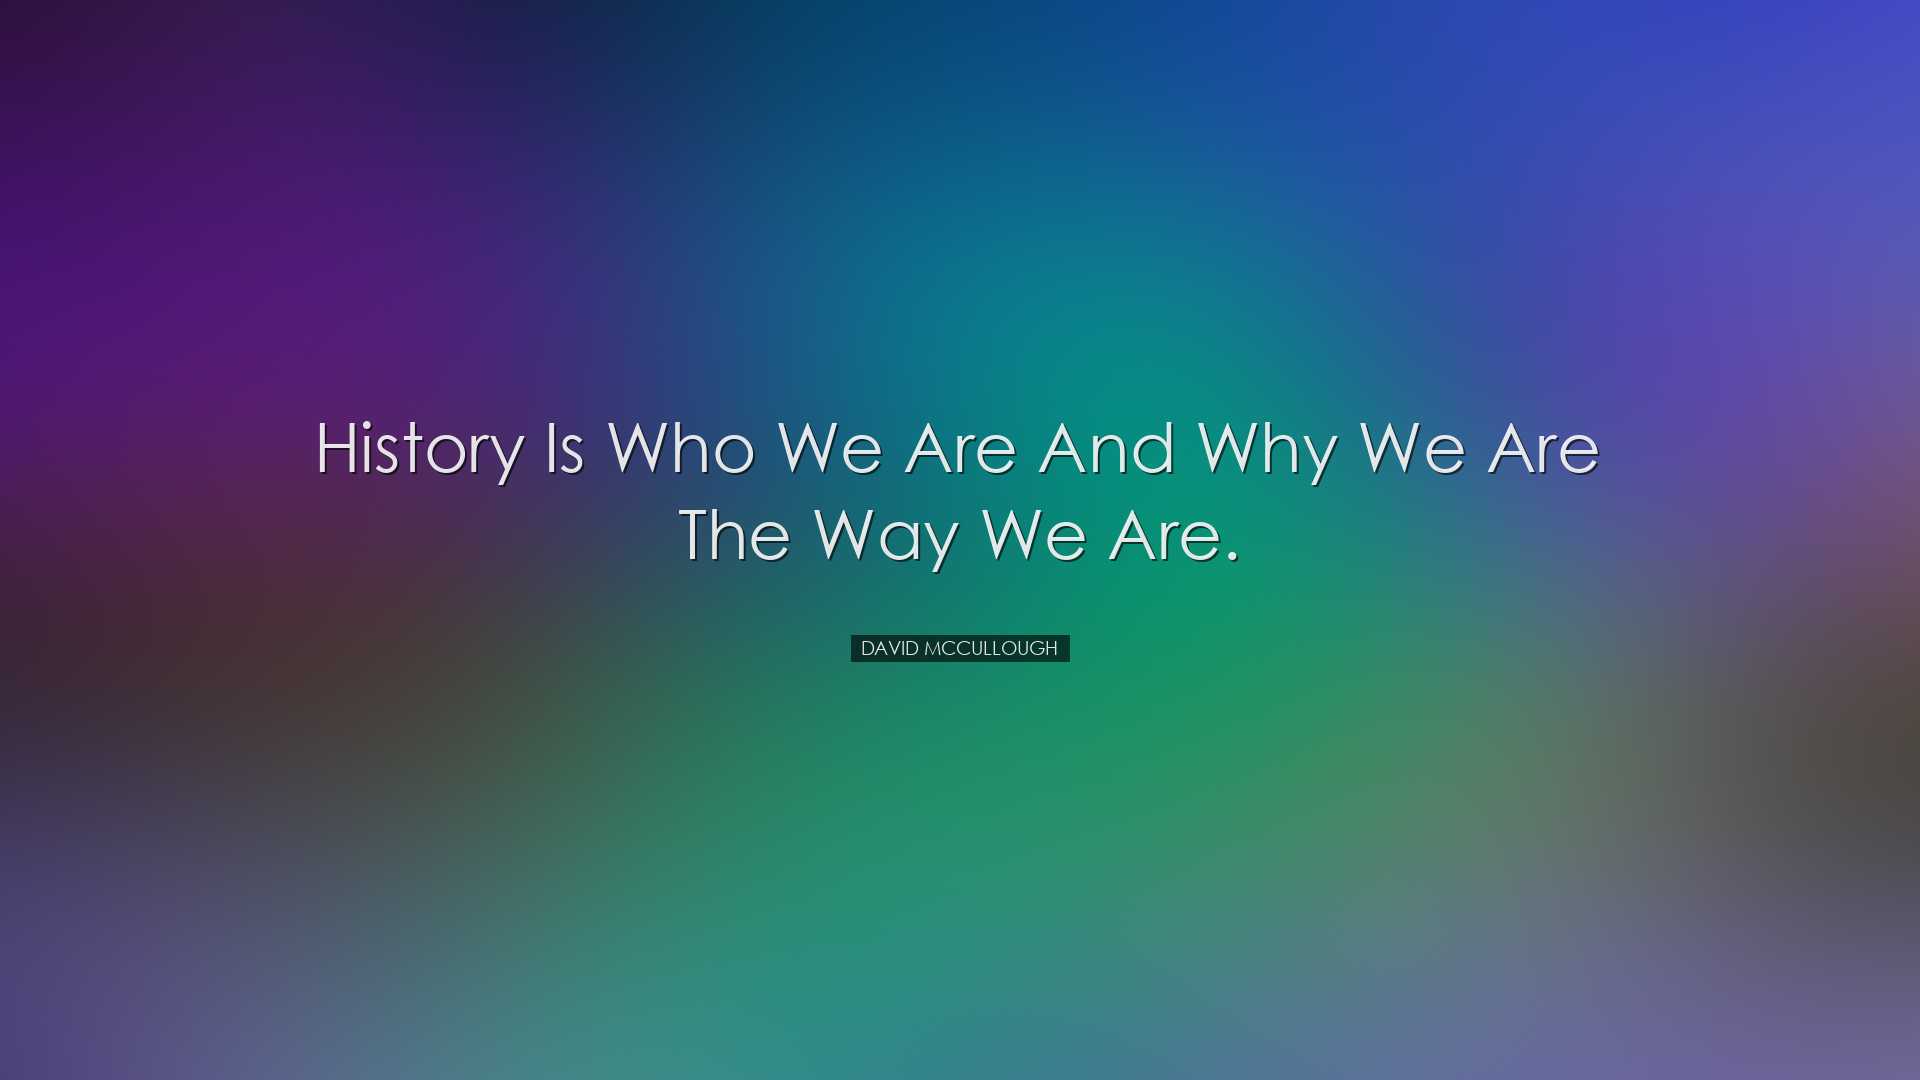 History is who we are and why we are the way we are. - David McCul